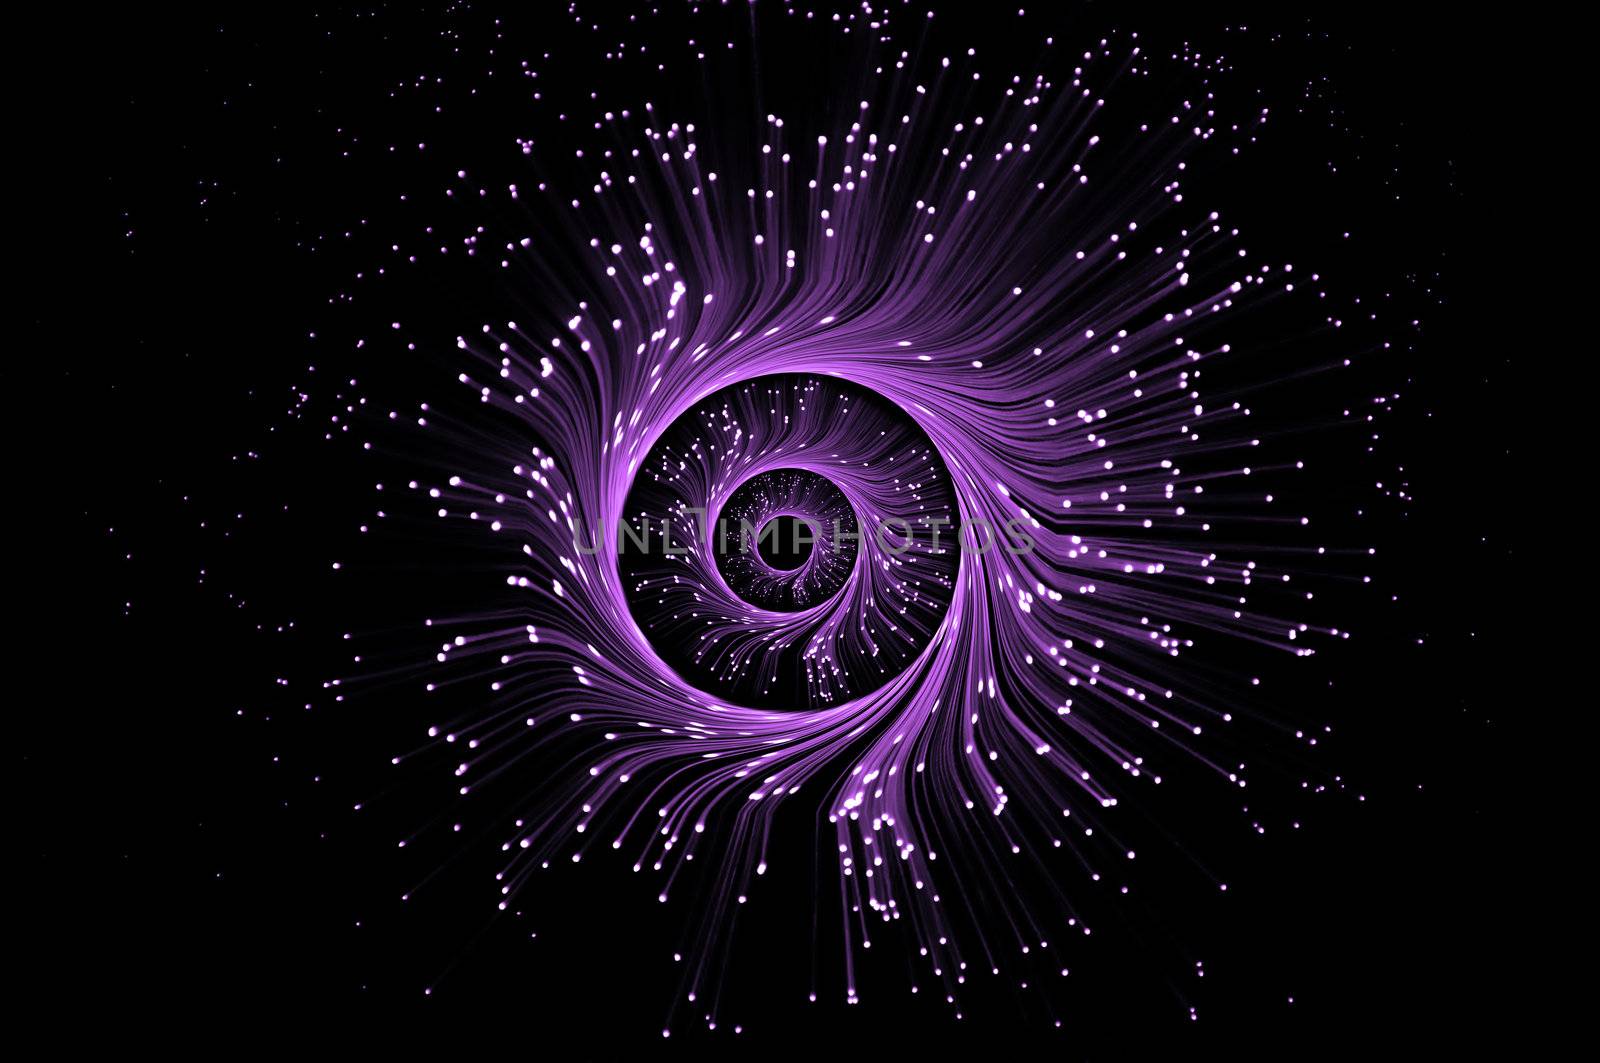 Illuminted purple fibre optic light strands forming three swirling rings against a black blackground.